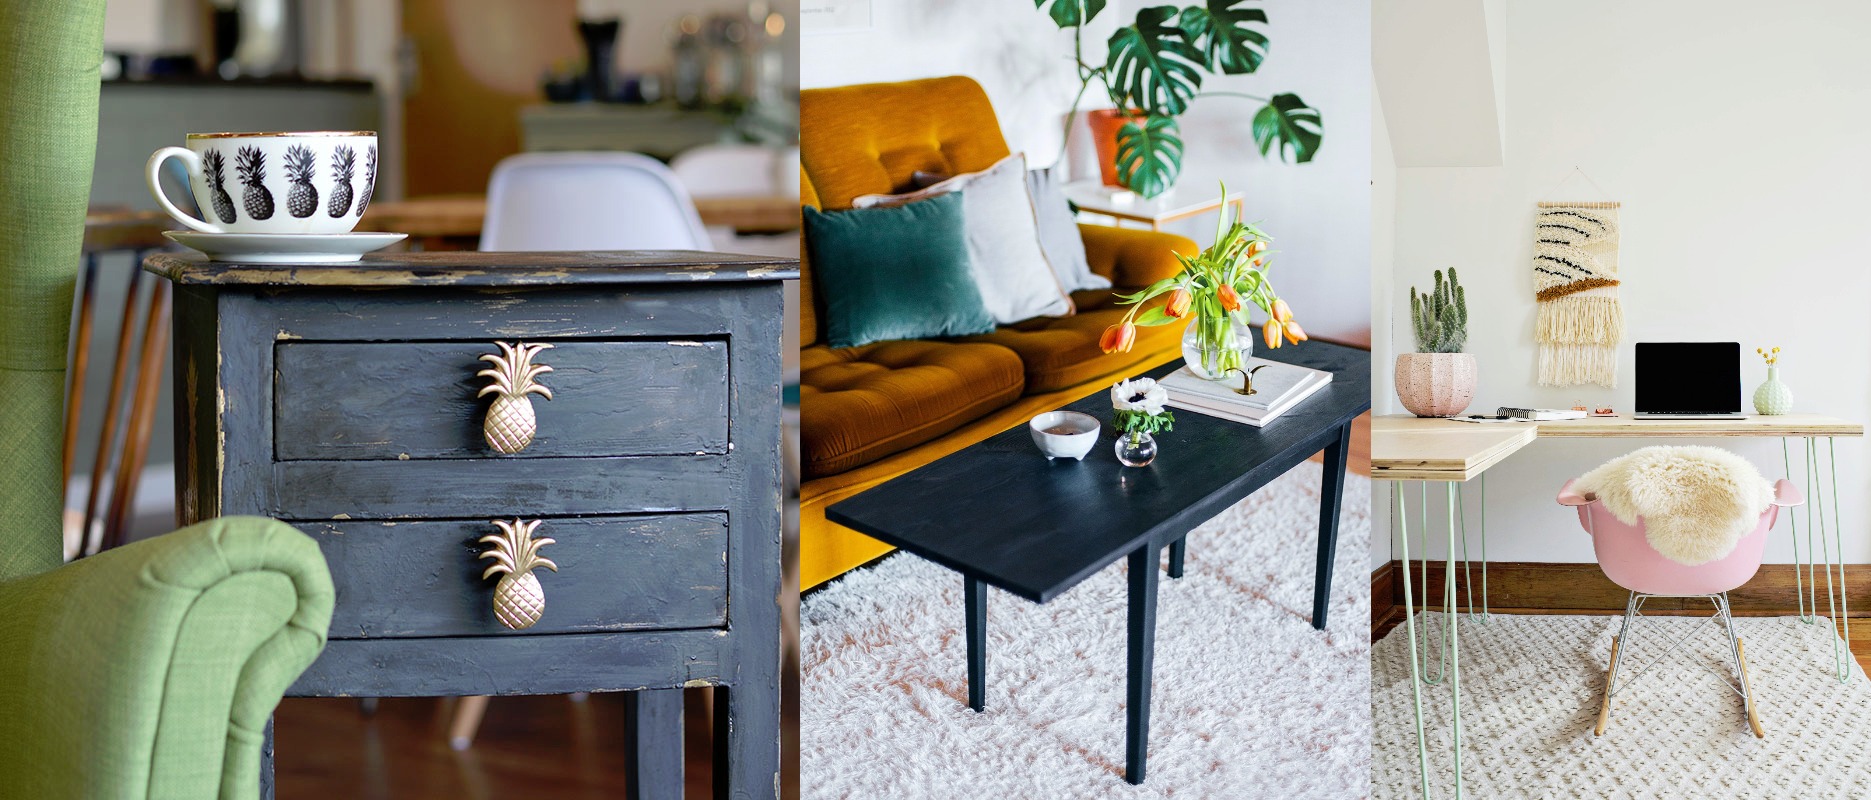 10 DIY Furniture Ideas To Add Extra Charm in Your Home